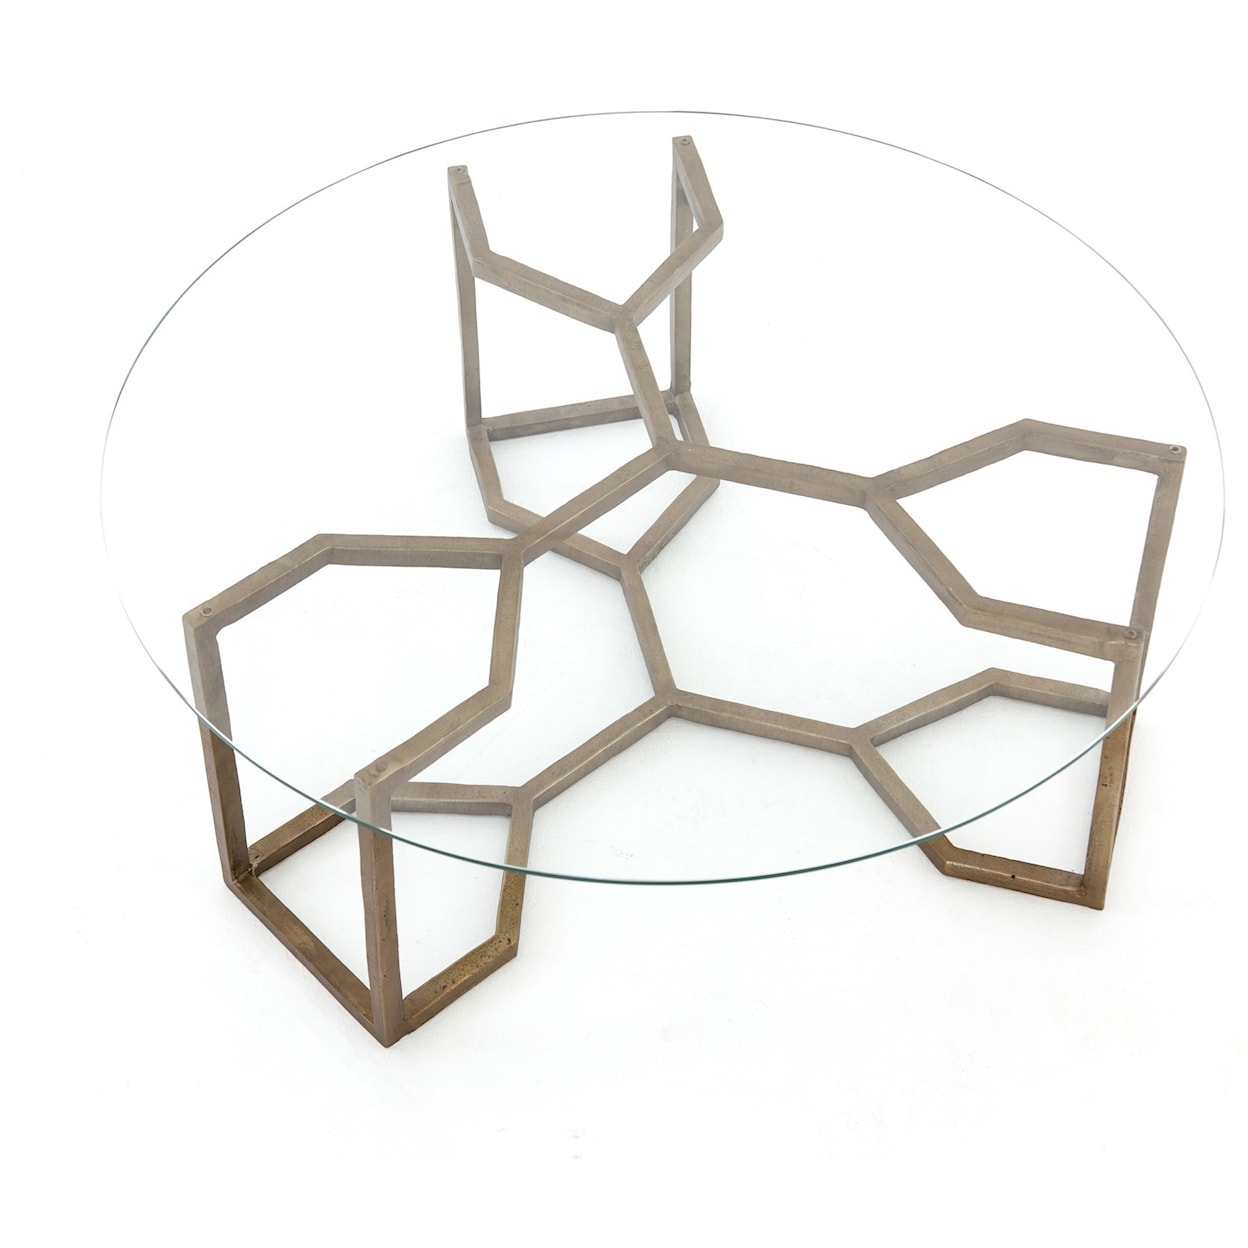 Four Hands Marlow Naomi Coffee Table